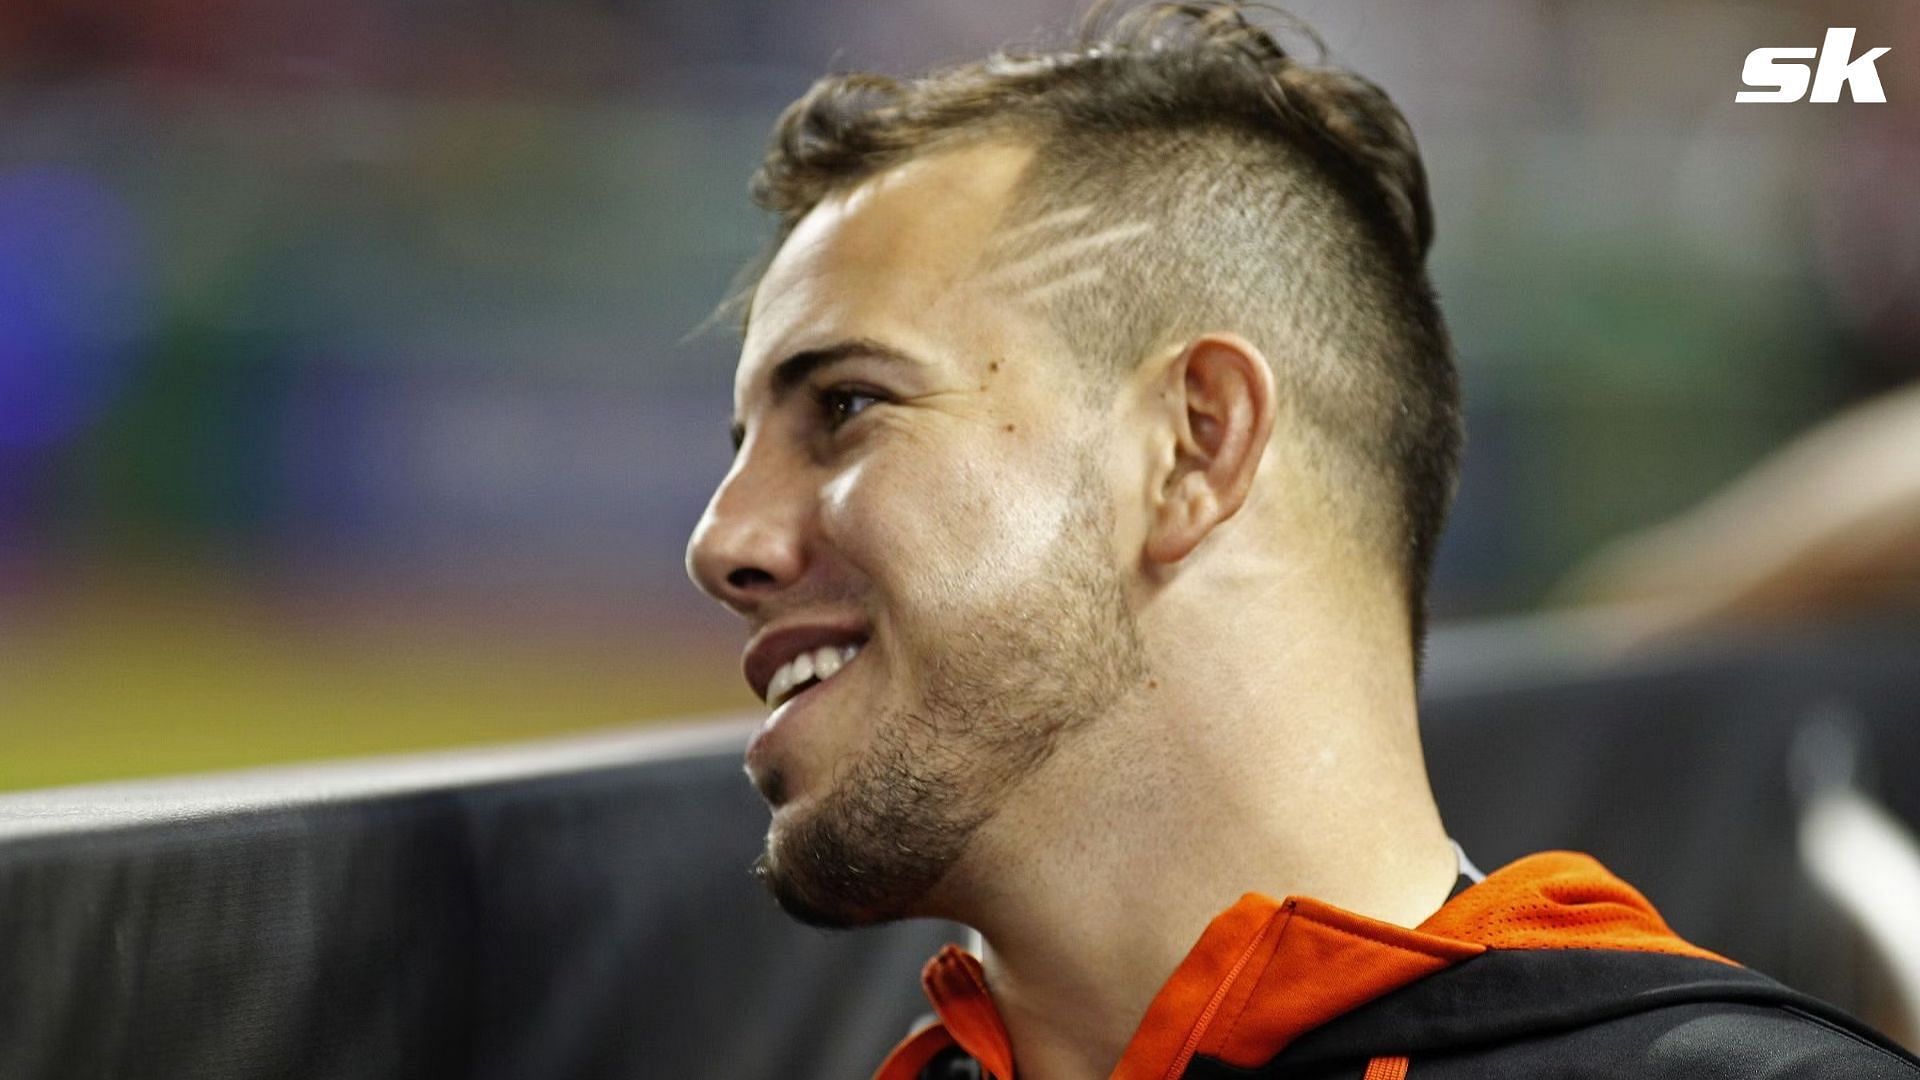 When José Fernández's girlfriend spoke about giving birth to their child  following the star pitcher's untimely death